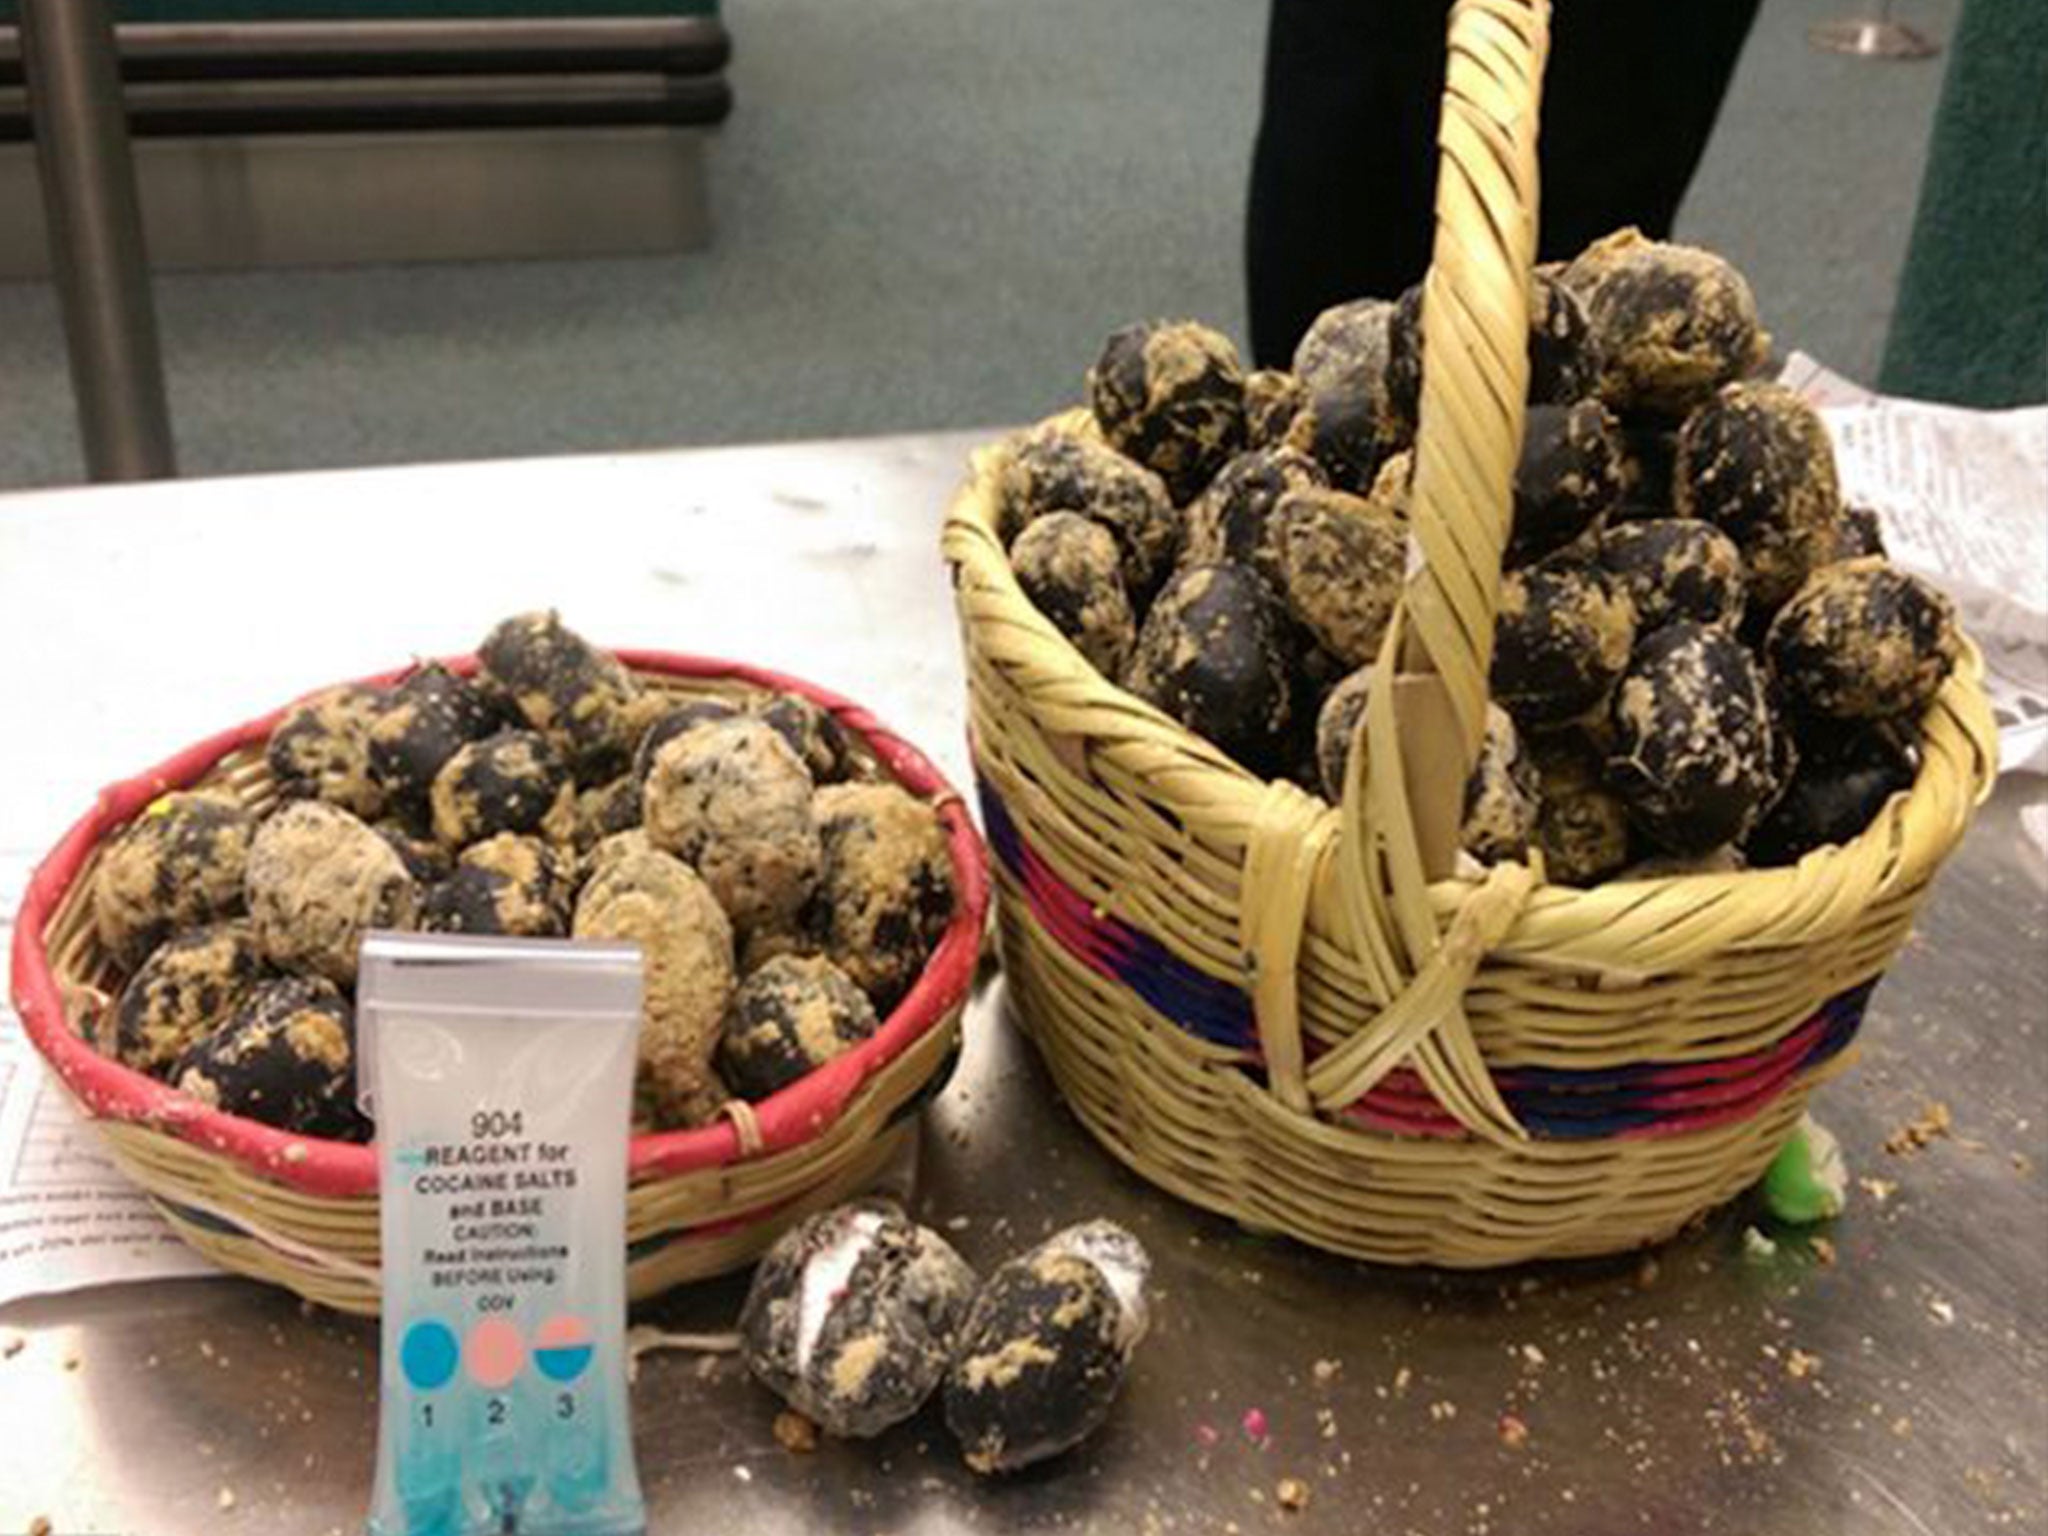 Cocaine cookies seized at Newark Liberty International Airport